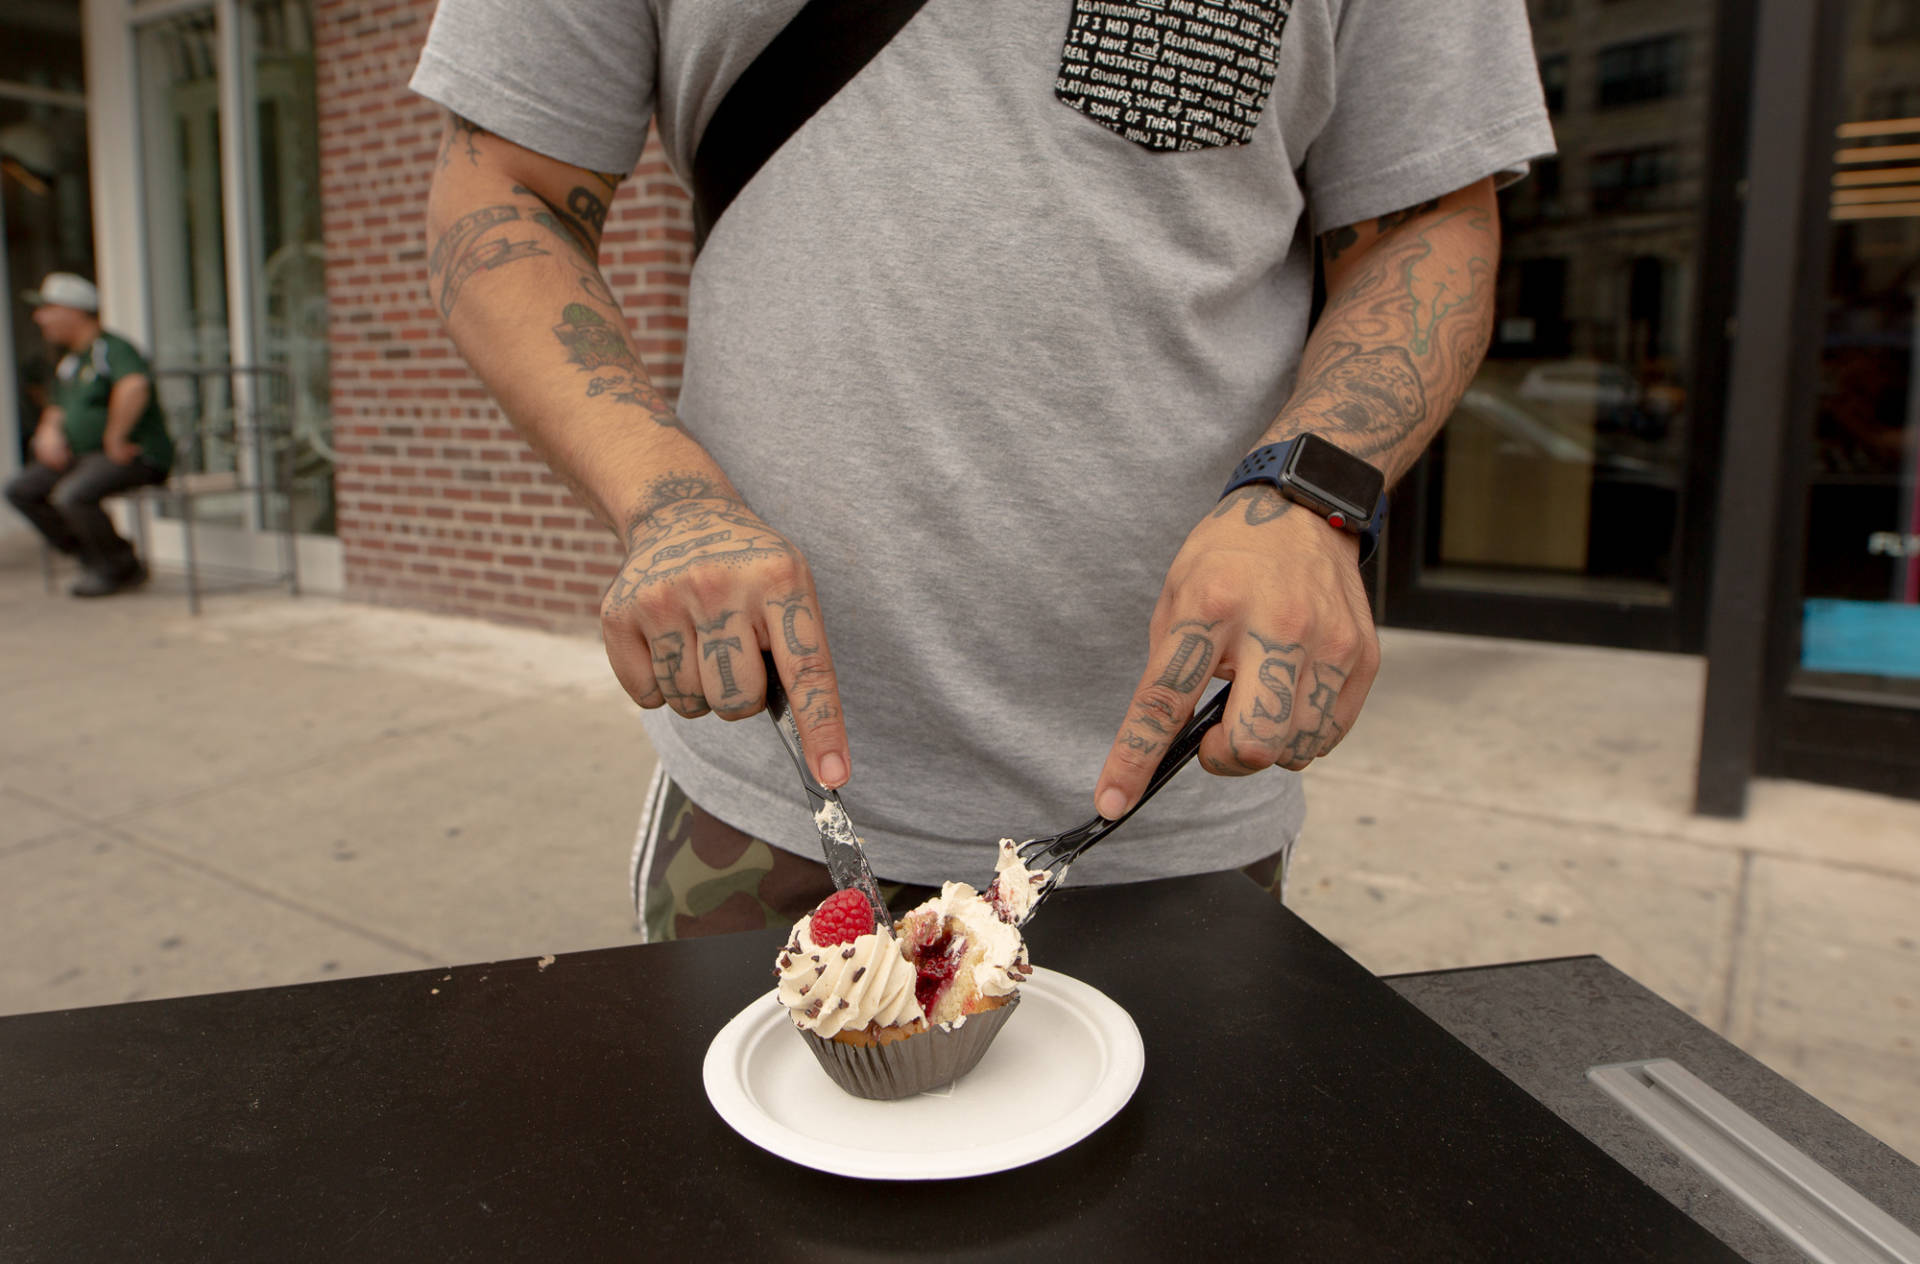 Castro digs into a vegan raspberry cupcake on a discarded desk outside of By Chloe.